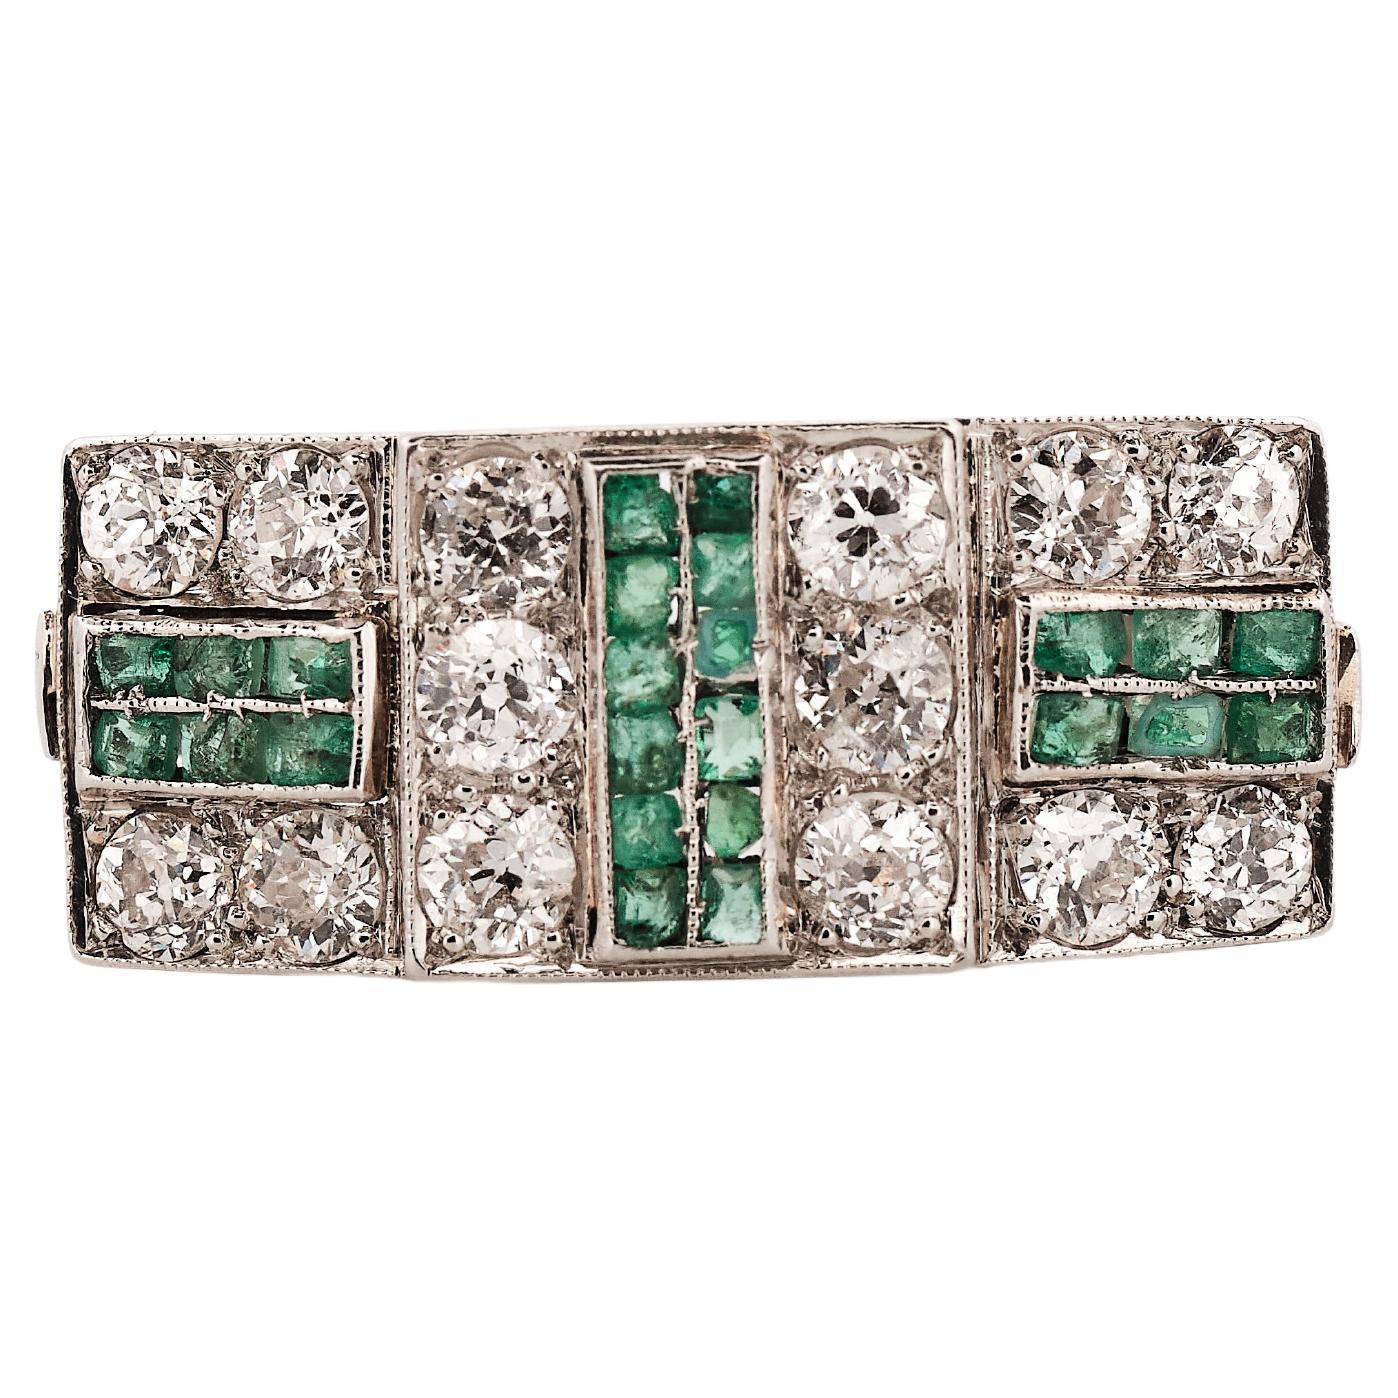 Art deco style ring adorned with 14 pavè set old mine diamonds.